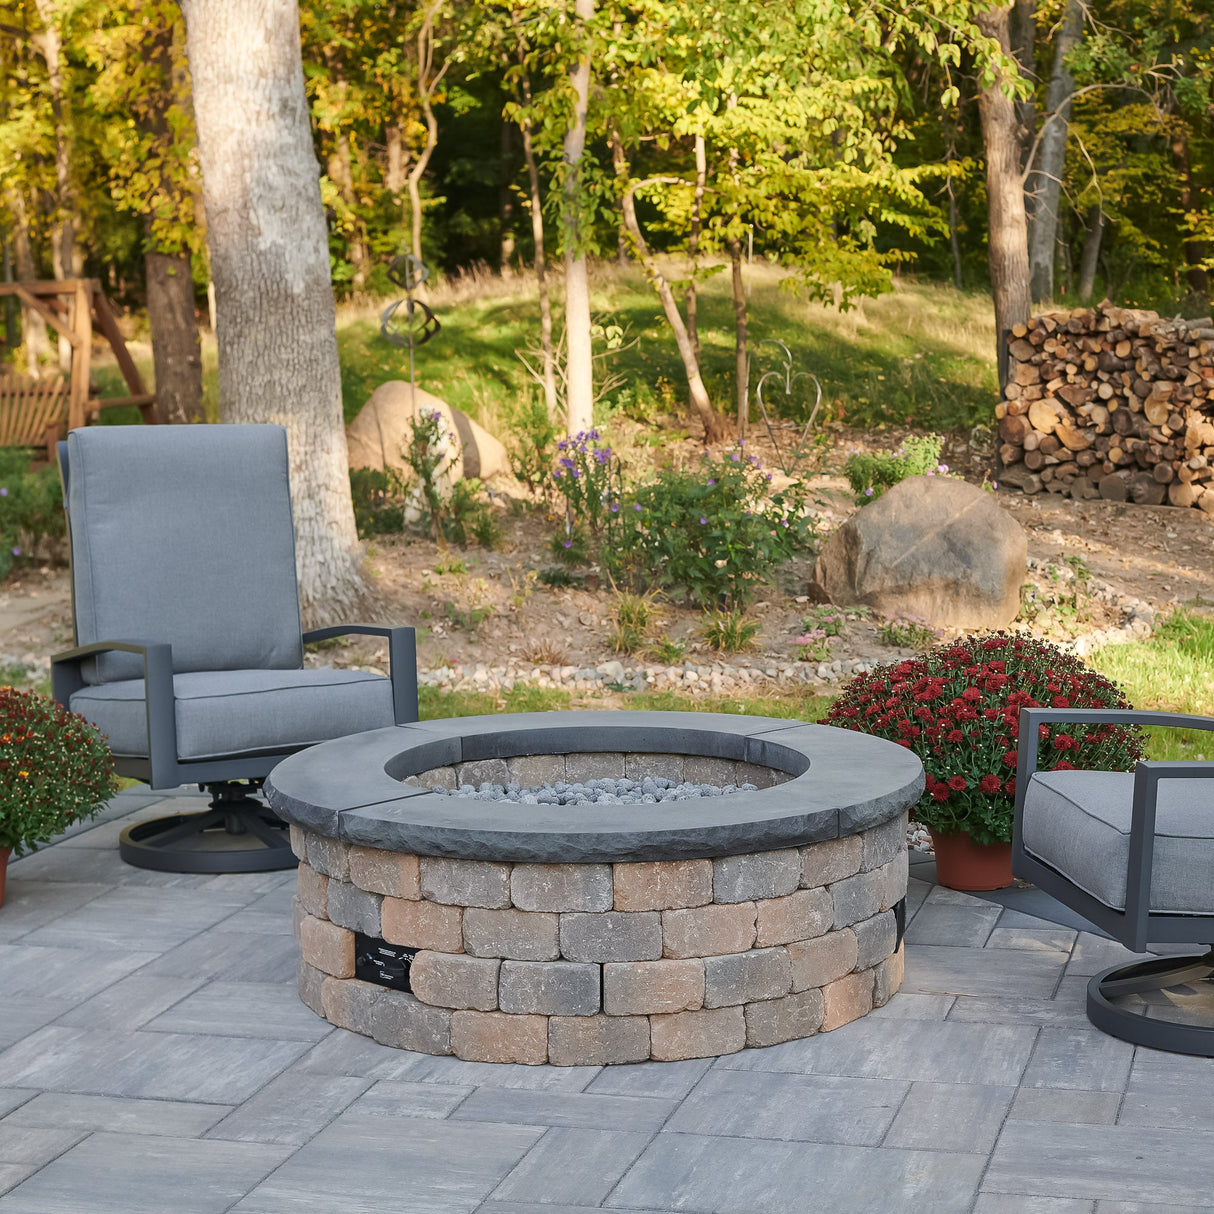 The Bronson Block Round Gas Fire Pit Kit sitting in an outdoor space surrounded by lounge chairs